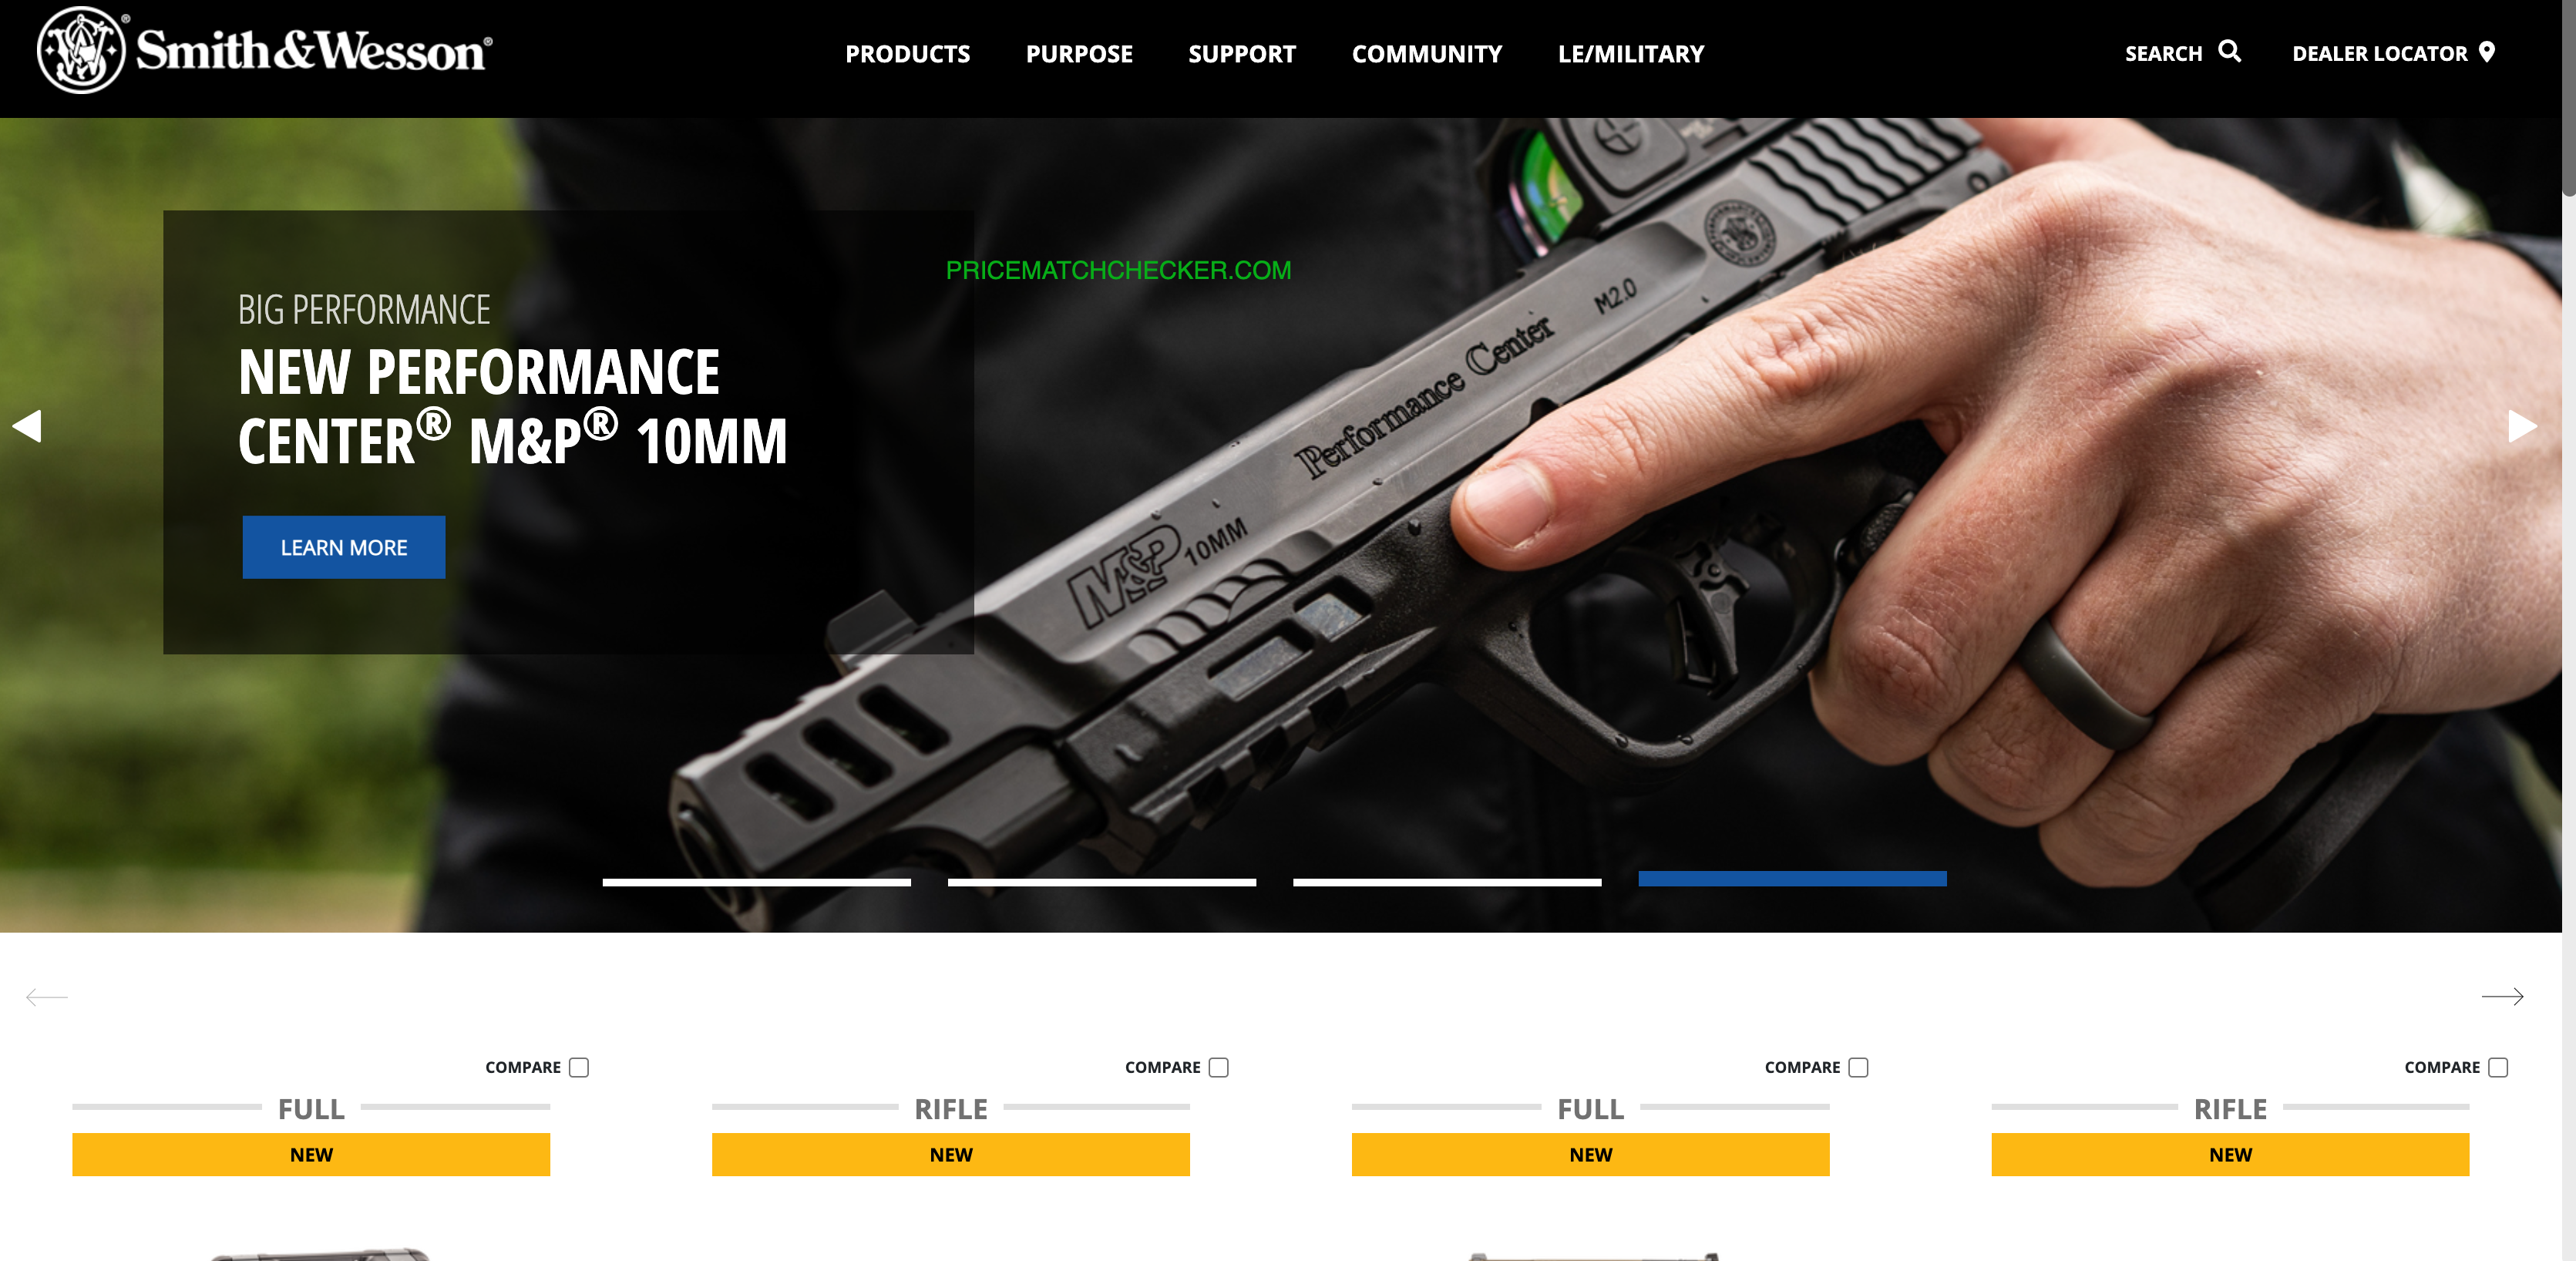 Does Smith Wesson Price Match